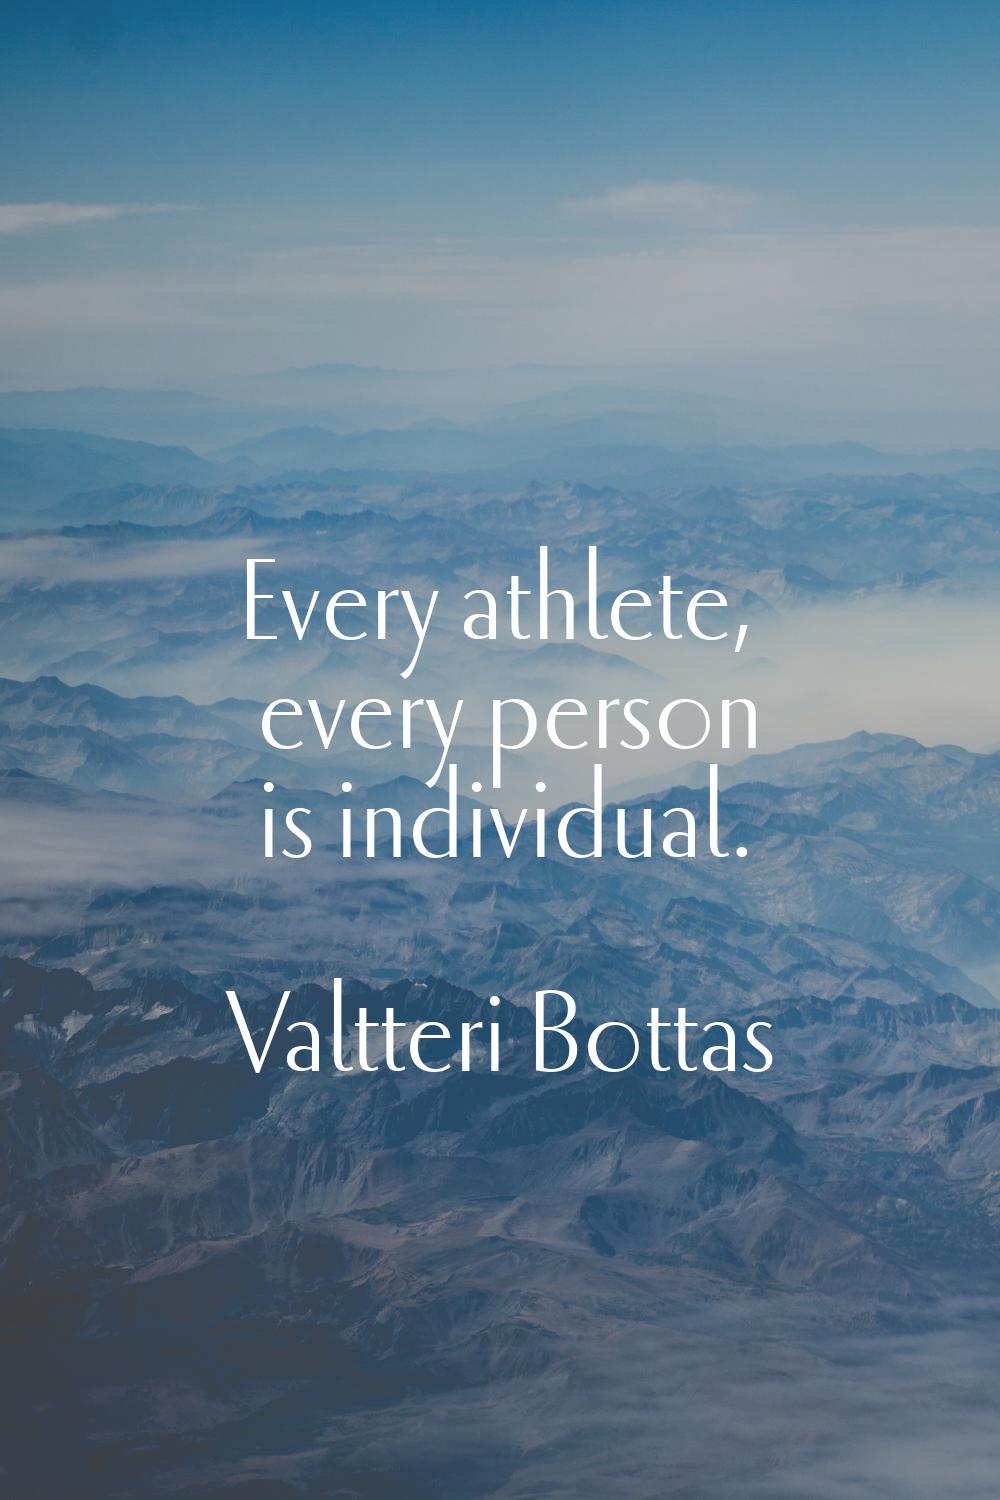 Every athlete, every person is individual.